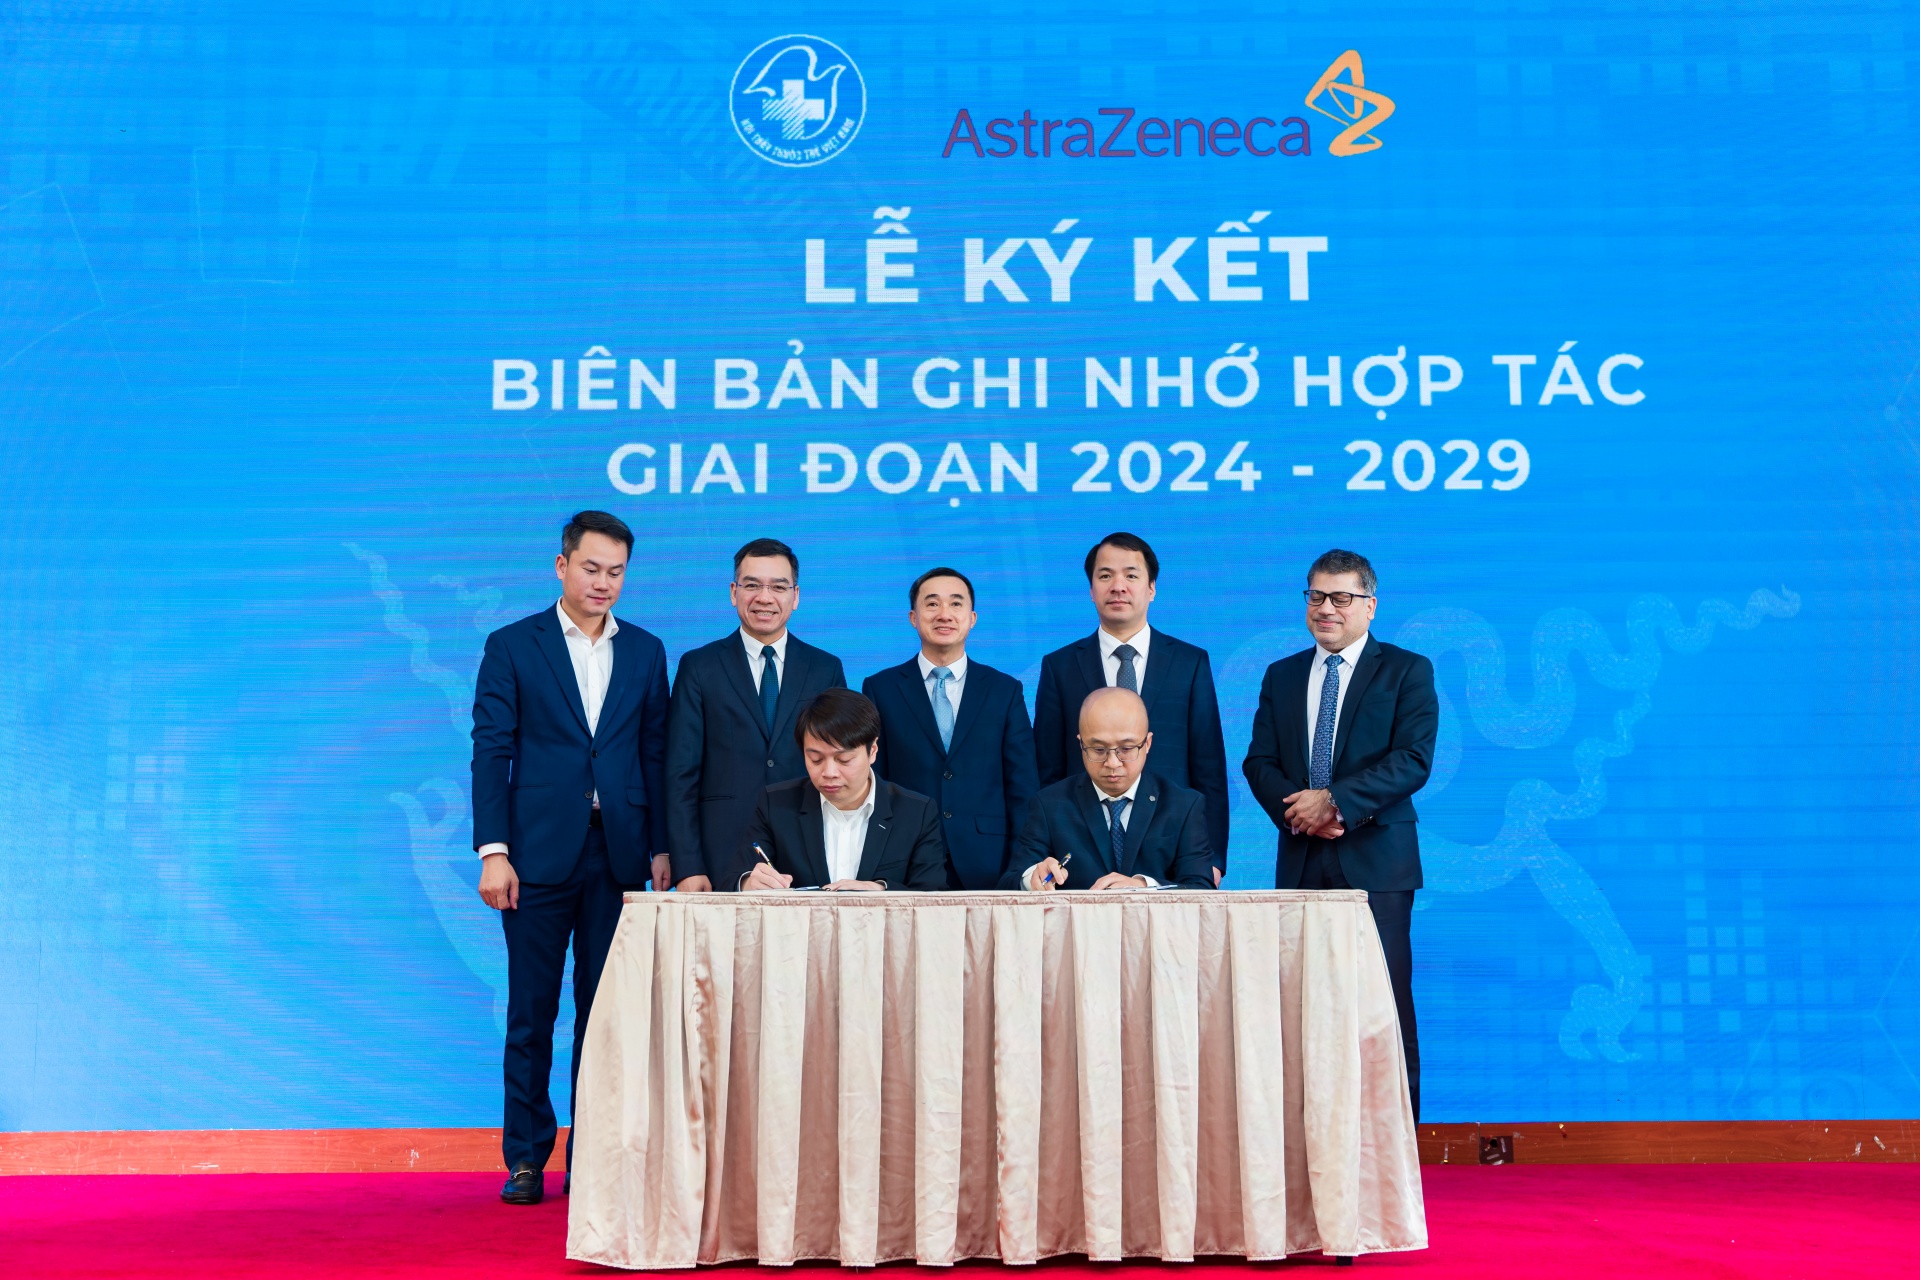 AstraZeneca, VYPA sign MOU to enhance healthcare in Vietnam